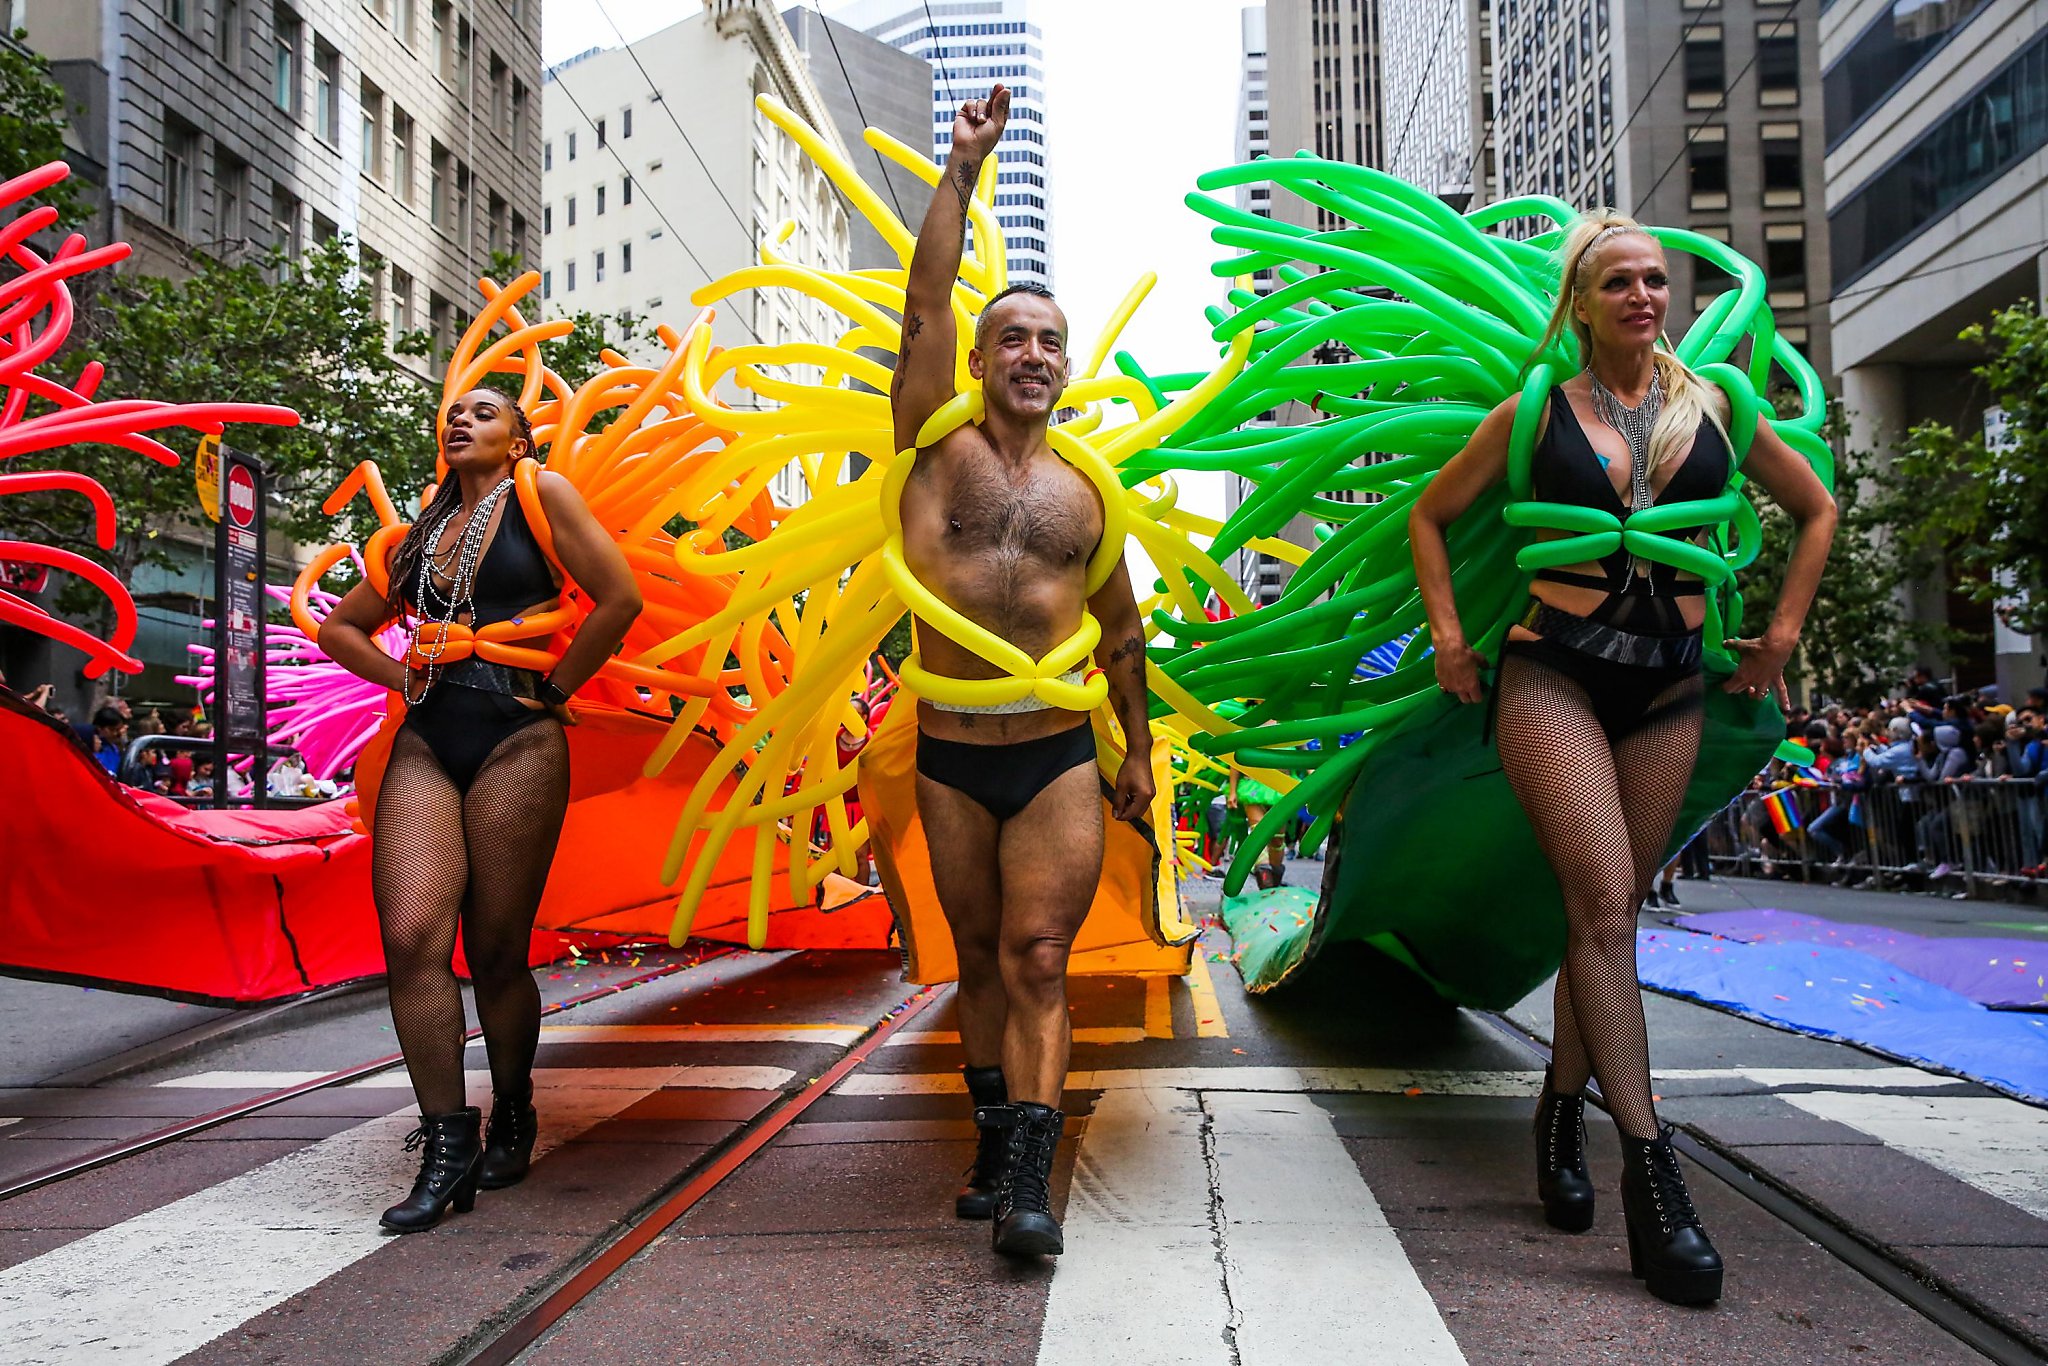 Watch the San Francisco Pride parade in stunning slow motion